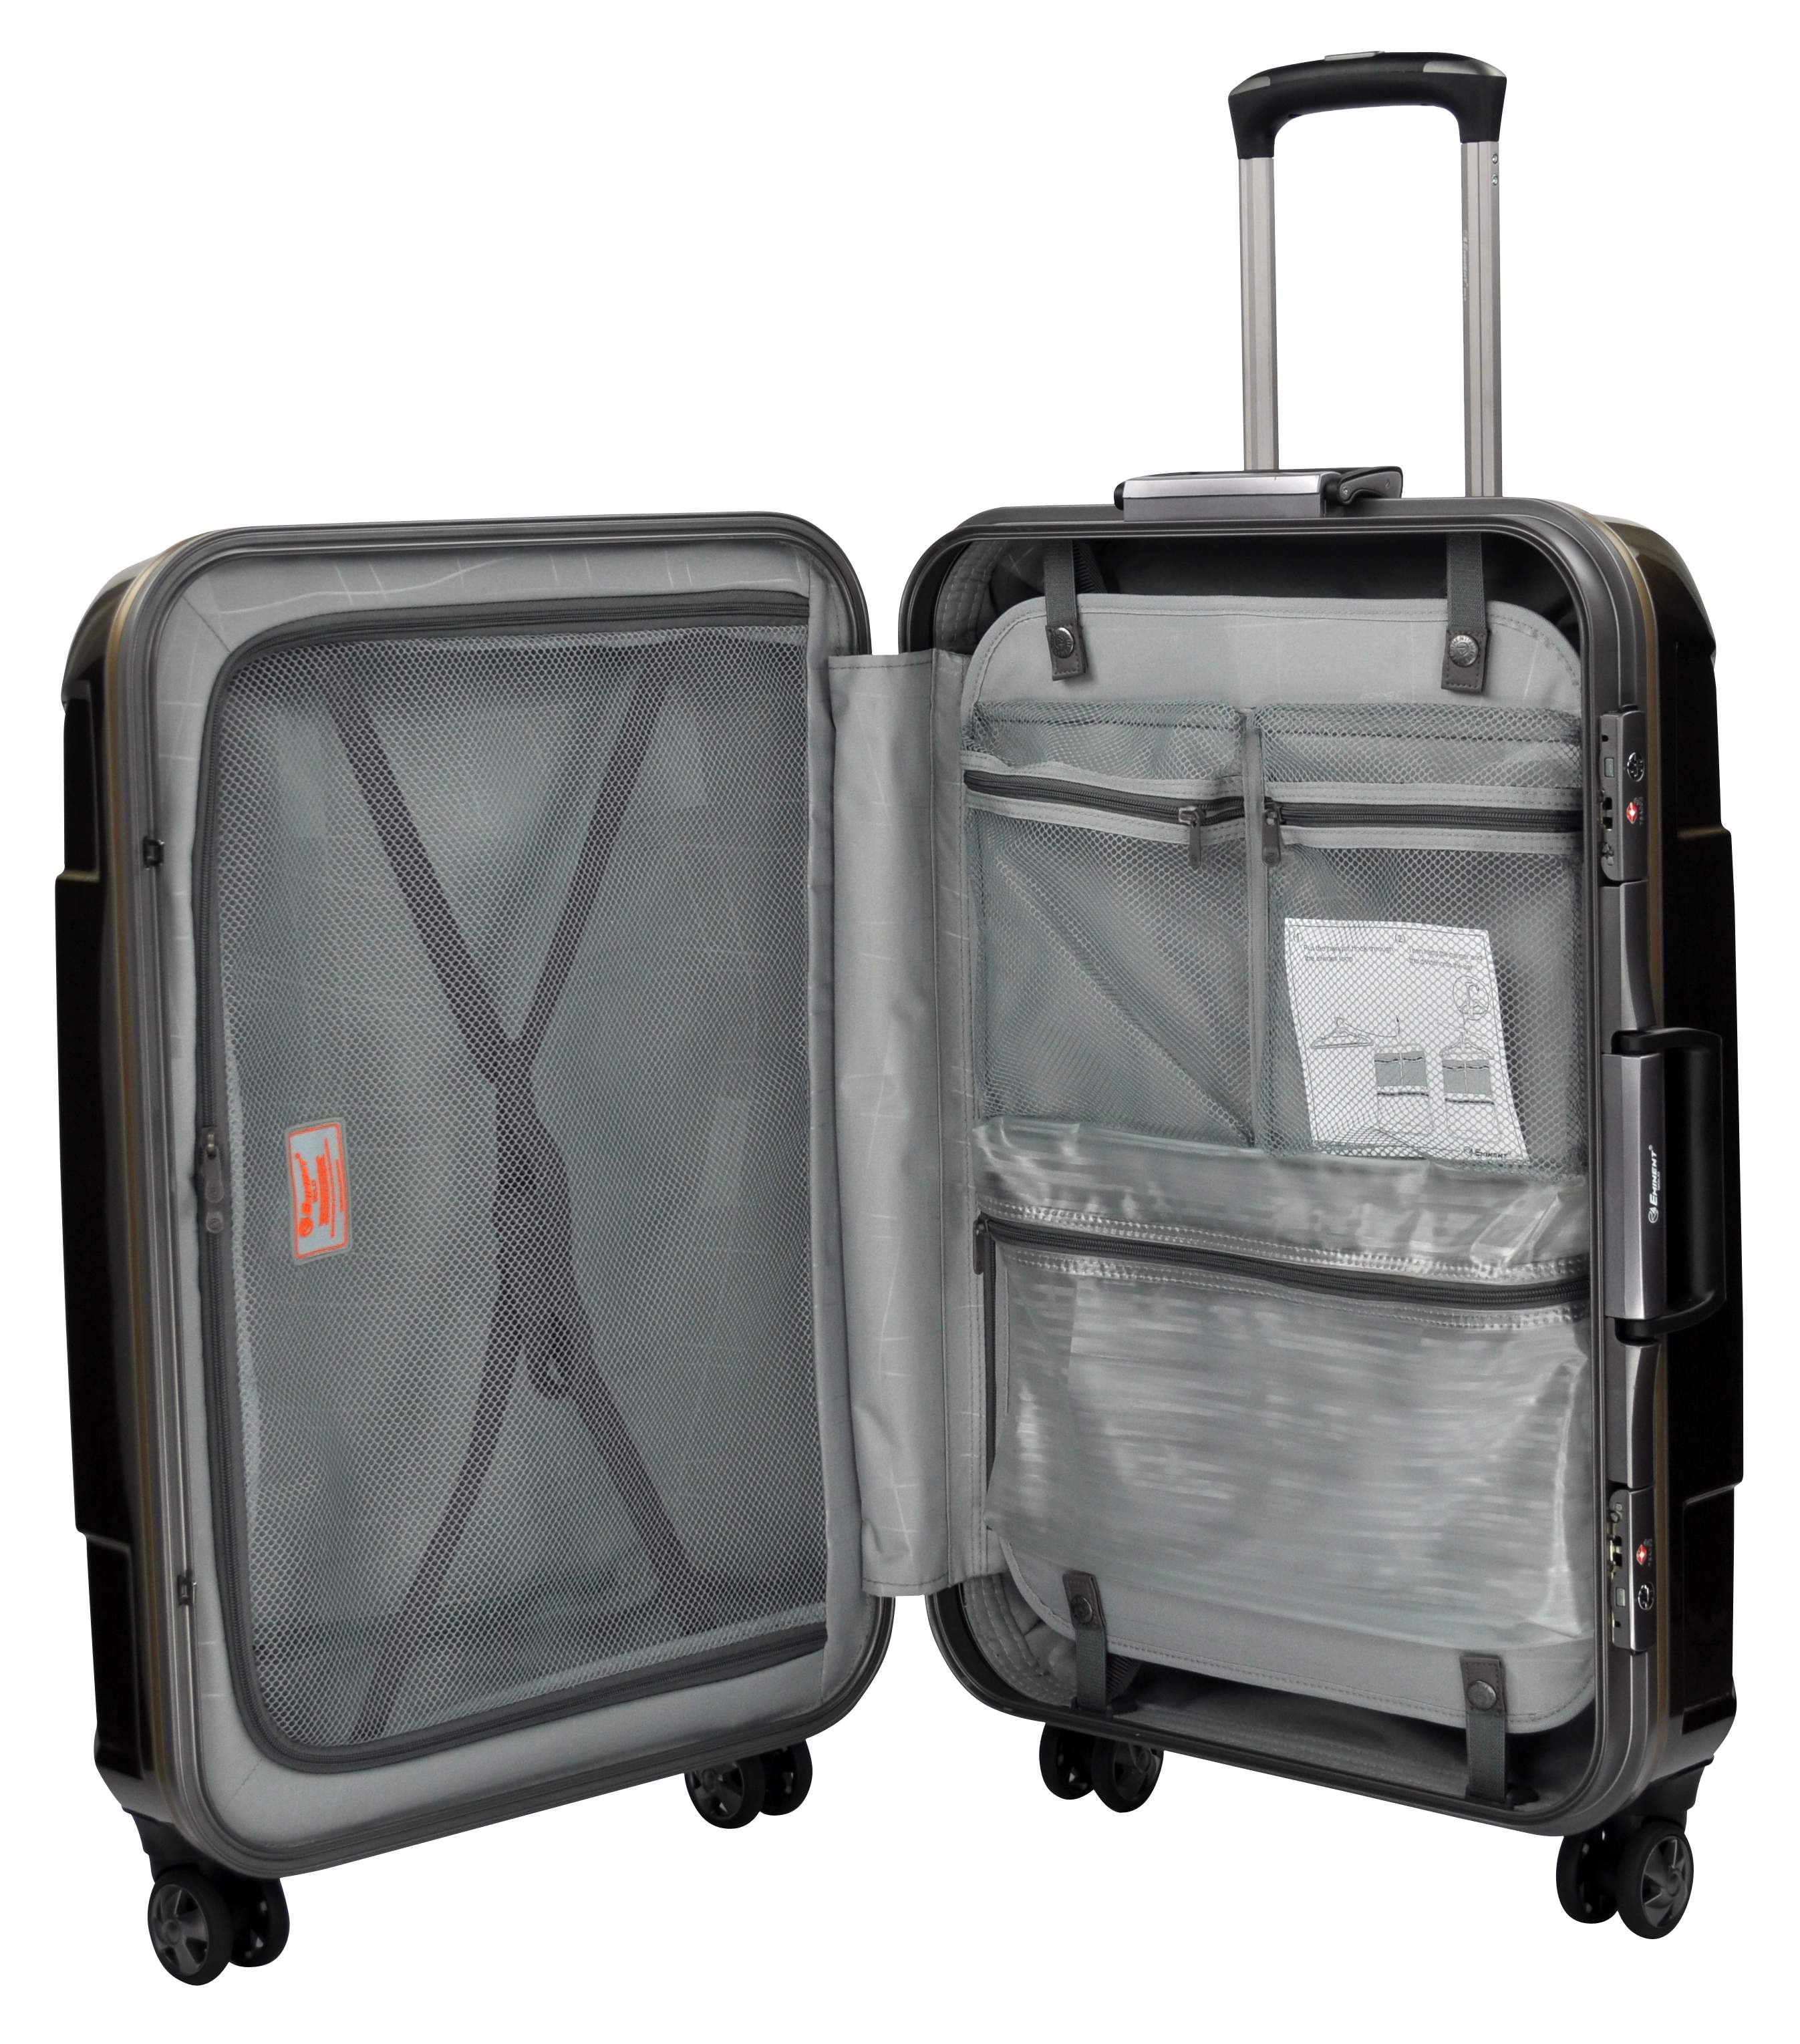 Eminent Carry-on Travel Luggage Bag 4-Twin 360° Wheel Trolley (E9F7-20)